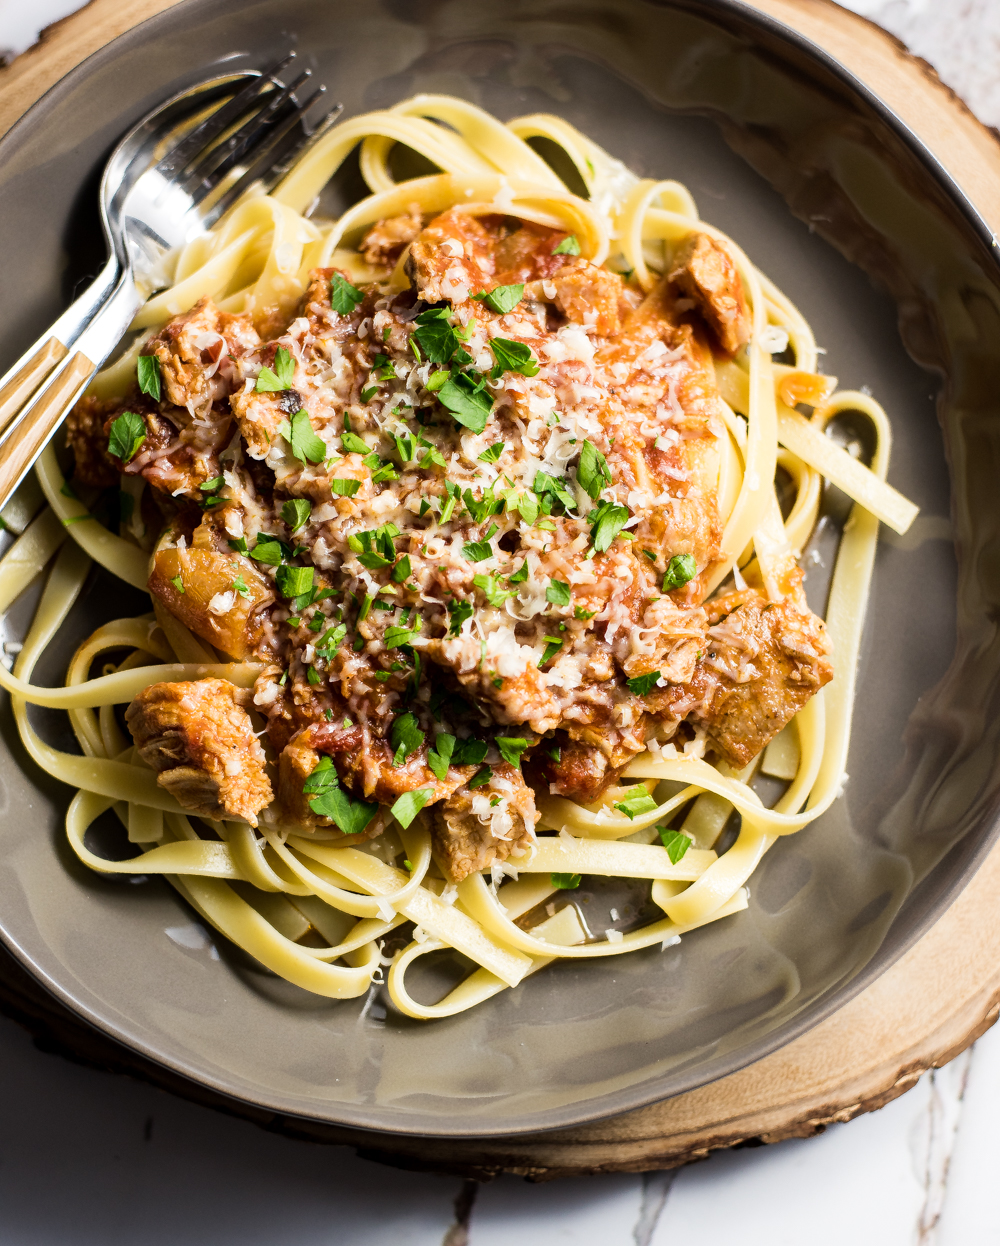 Looking for a way to use up that leftover holiday ham? This leftover ham ragu with pork roast added is the perfect recipe for such an occasion!